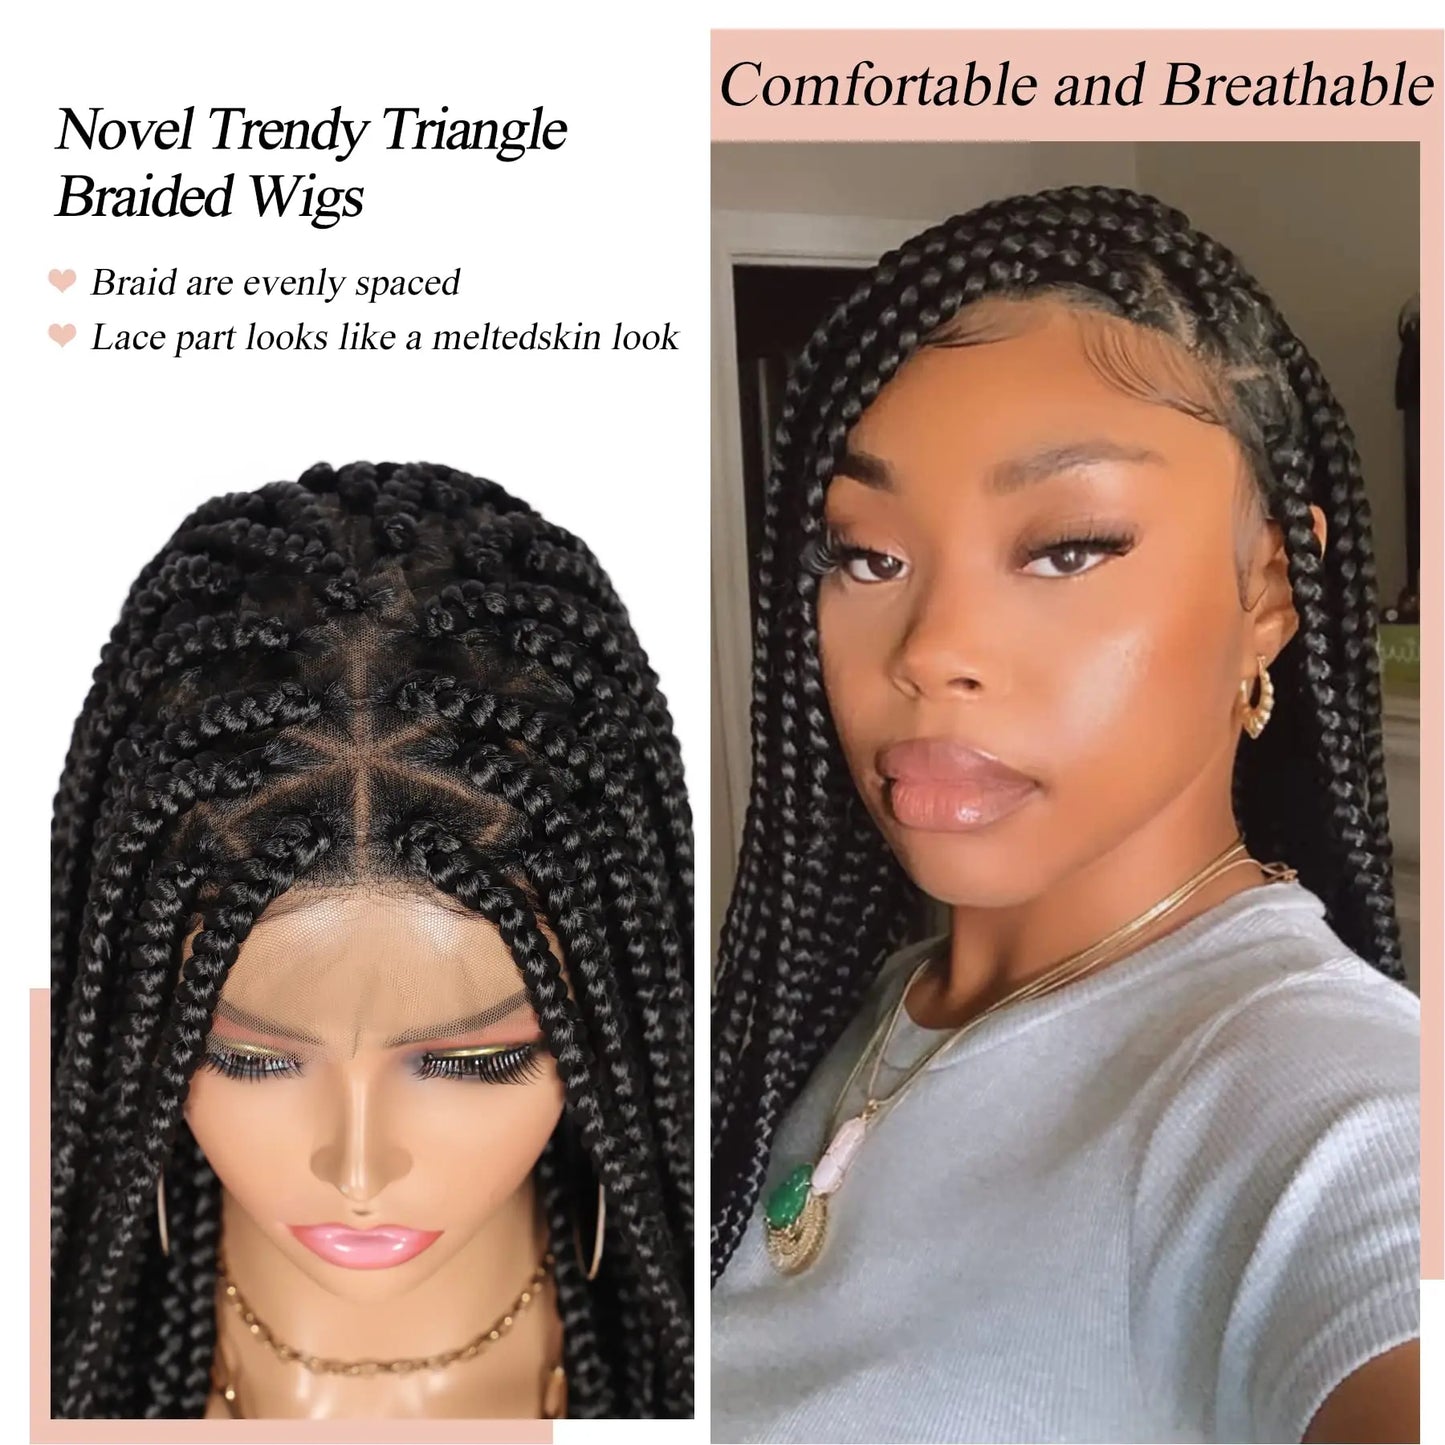 36'' Triangle Knotless Box Braided Wigs, Box Braided Full Lace Front Wig with Baby Hair Cornrow Braids Wig